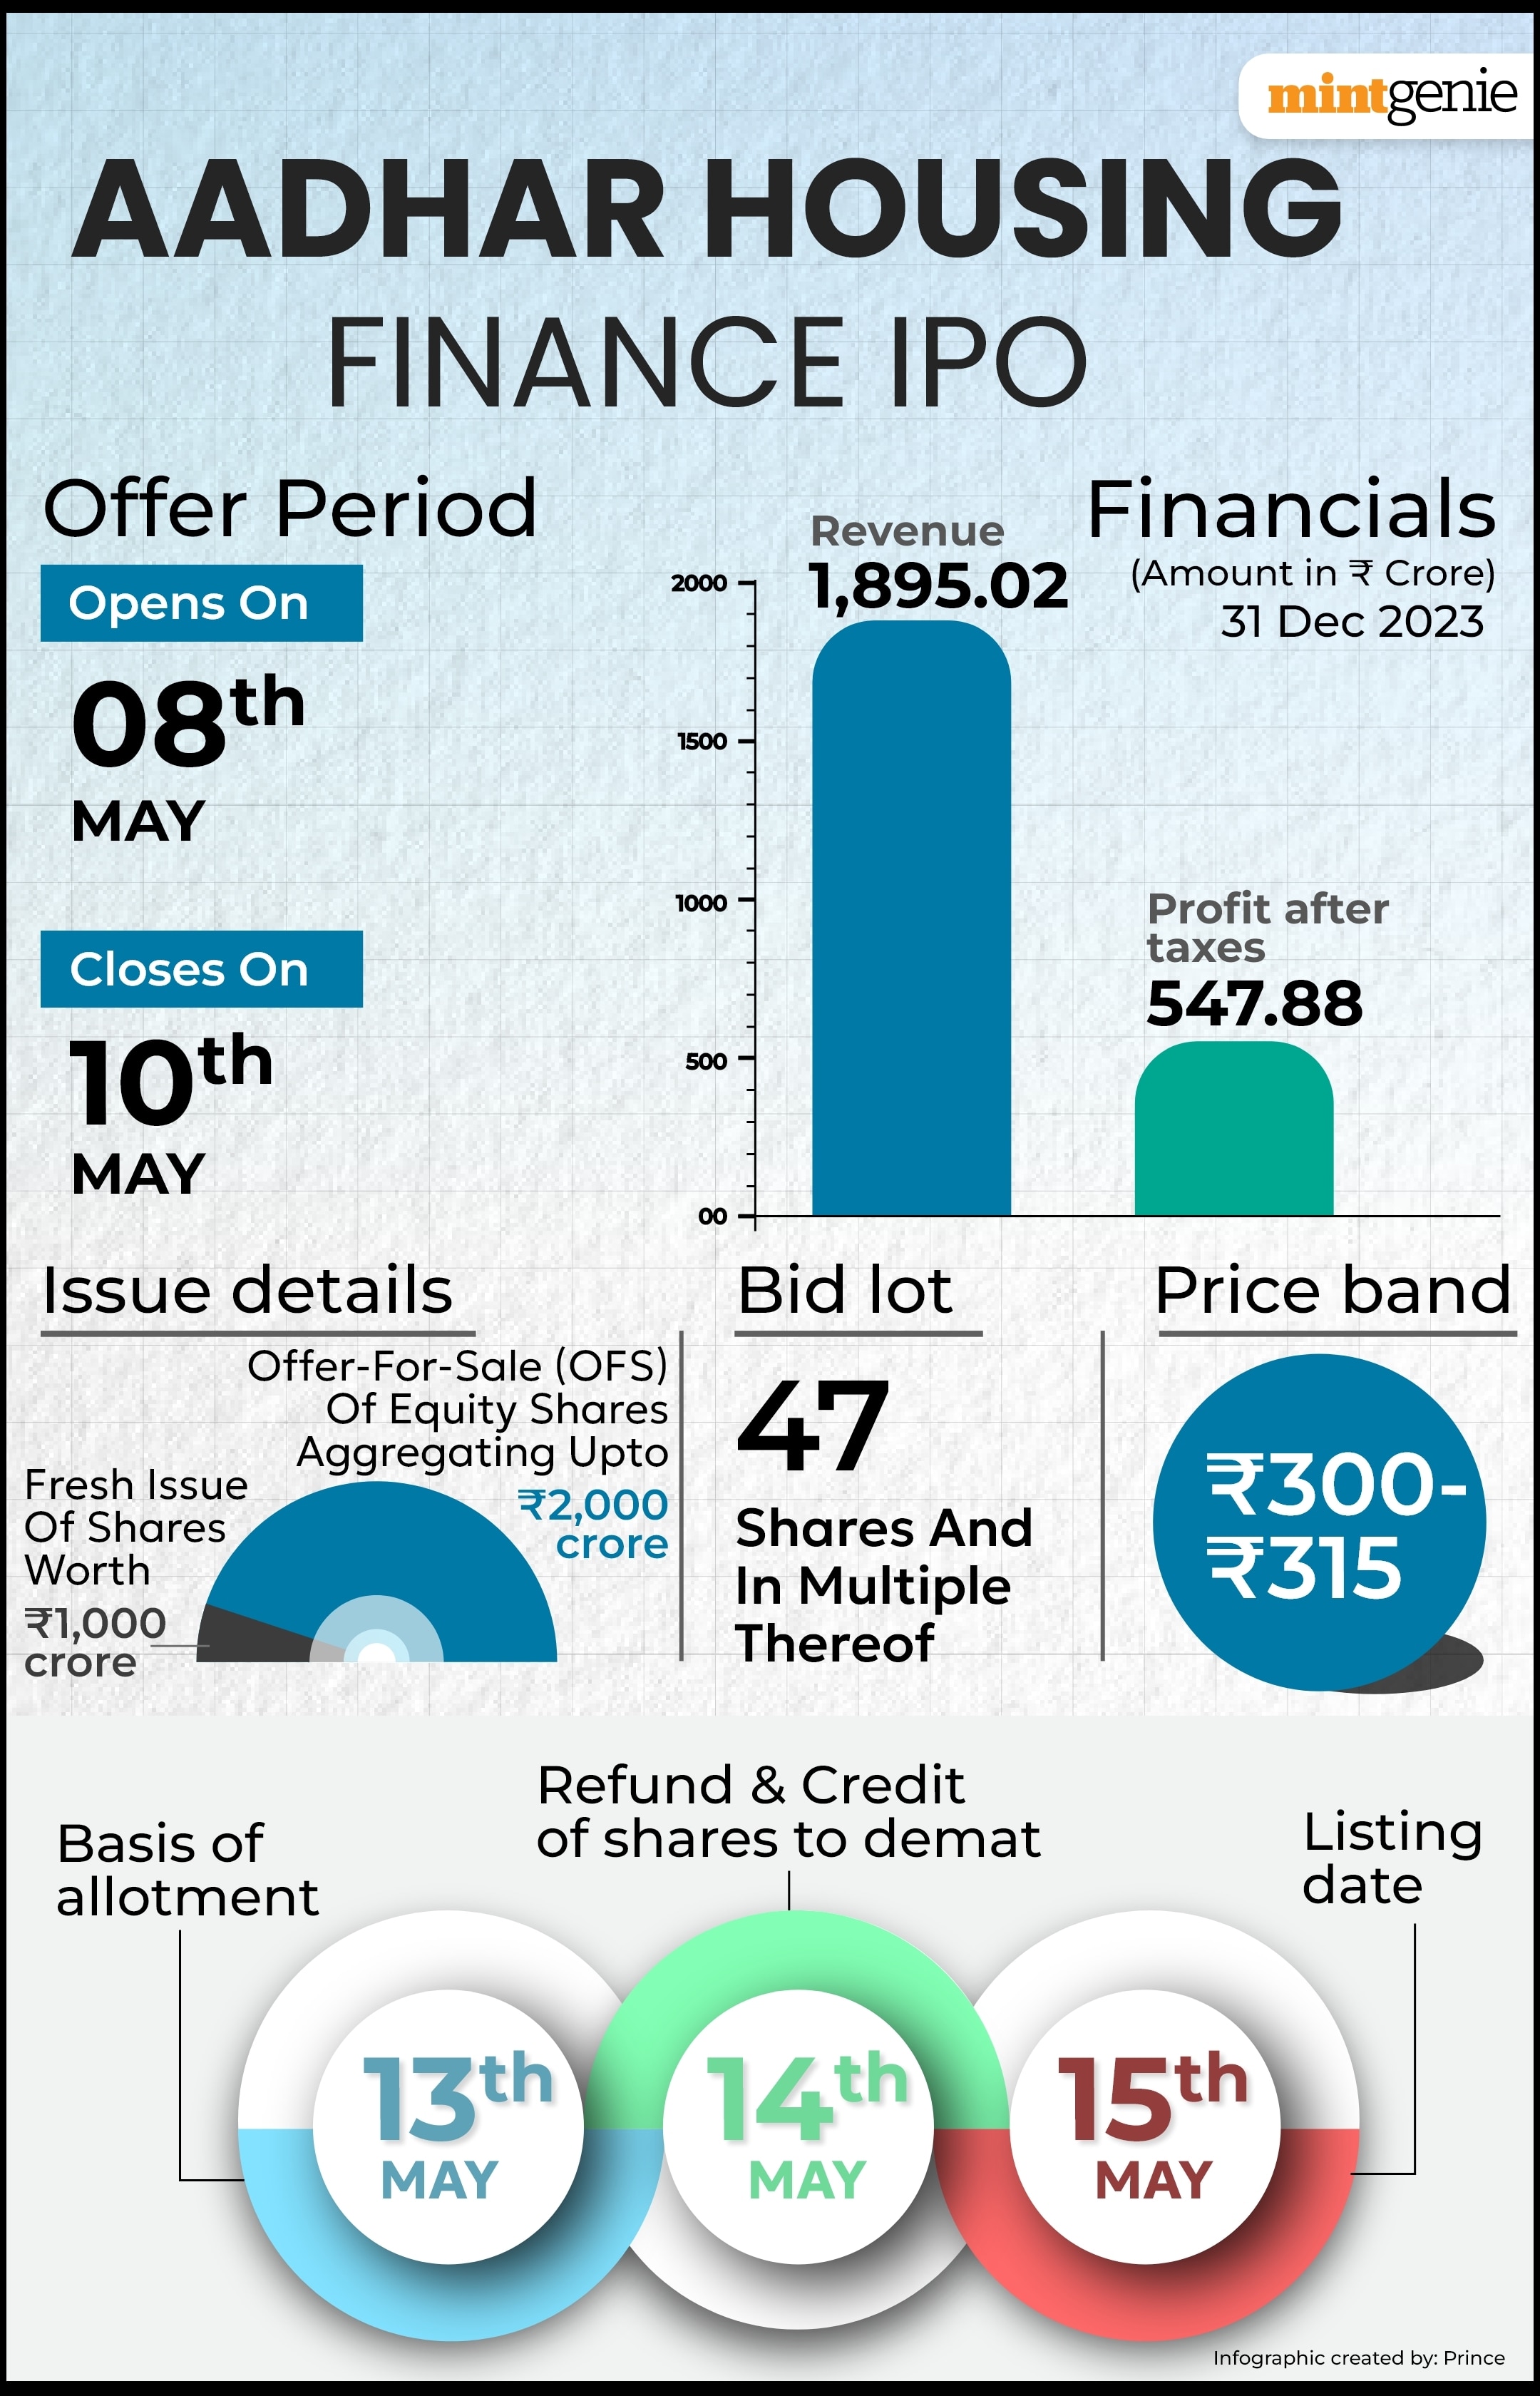 aadhar housing finance ipo: 10 key risks investors should know before subscribing to the issue